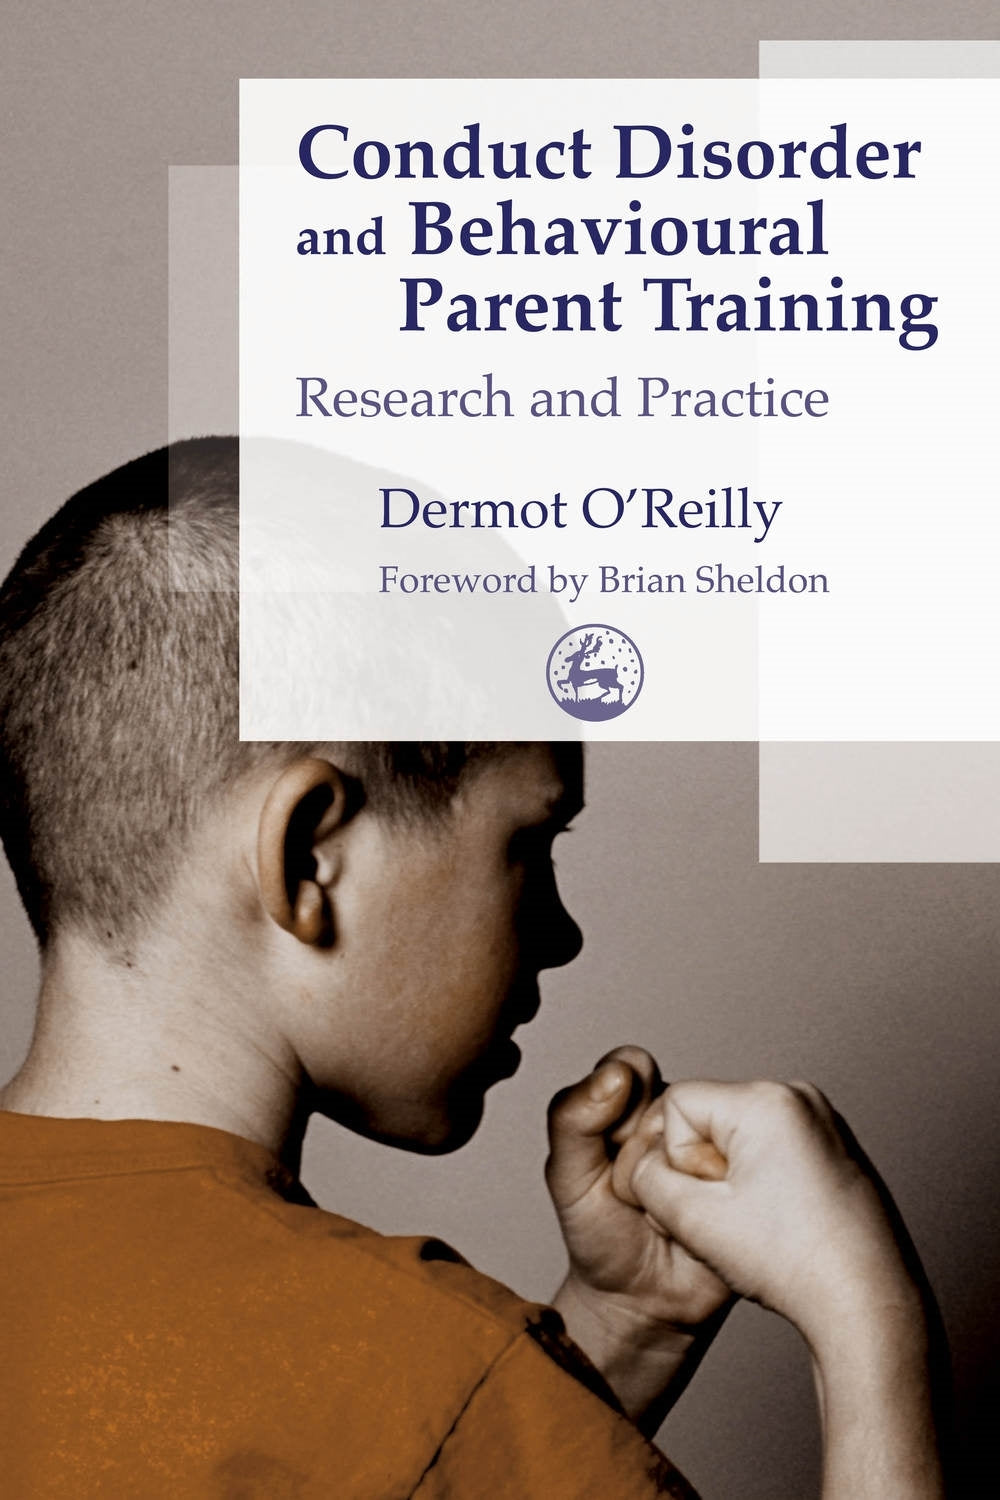 Conduct Disorder and Behavioural Parent Training by Dermot OReilly